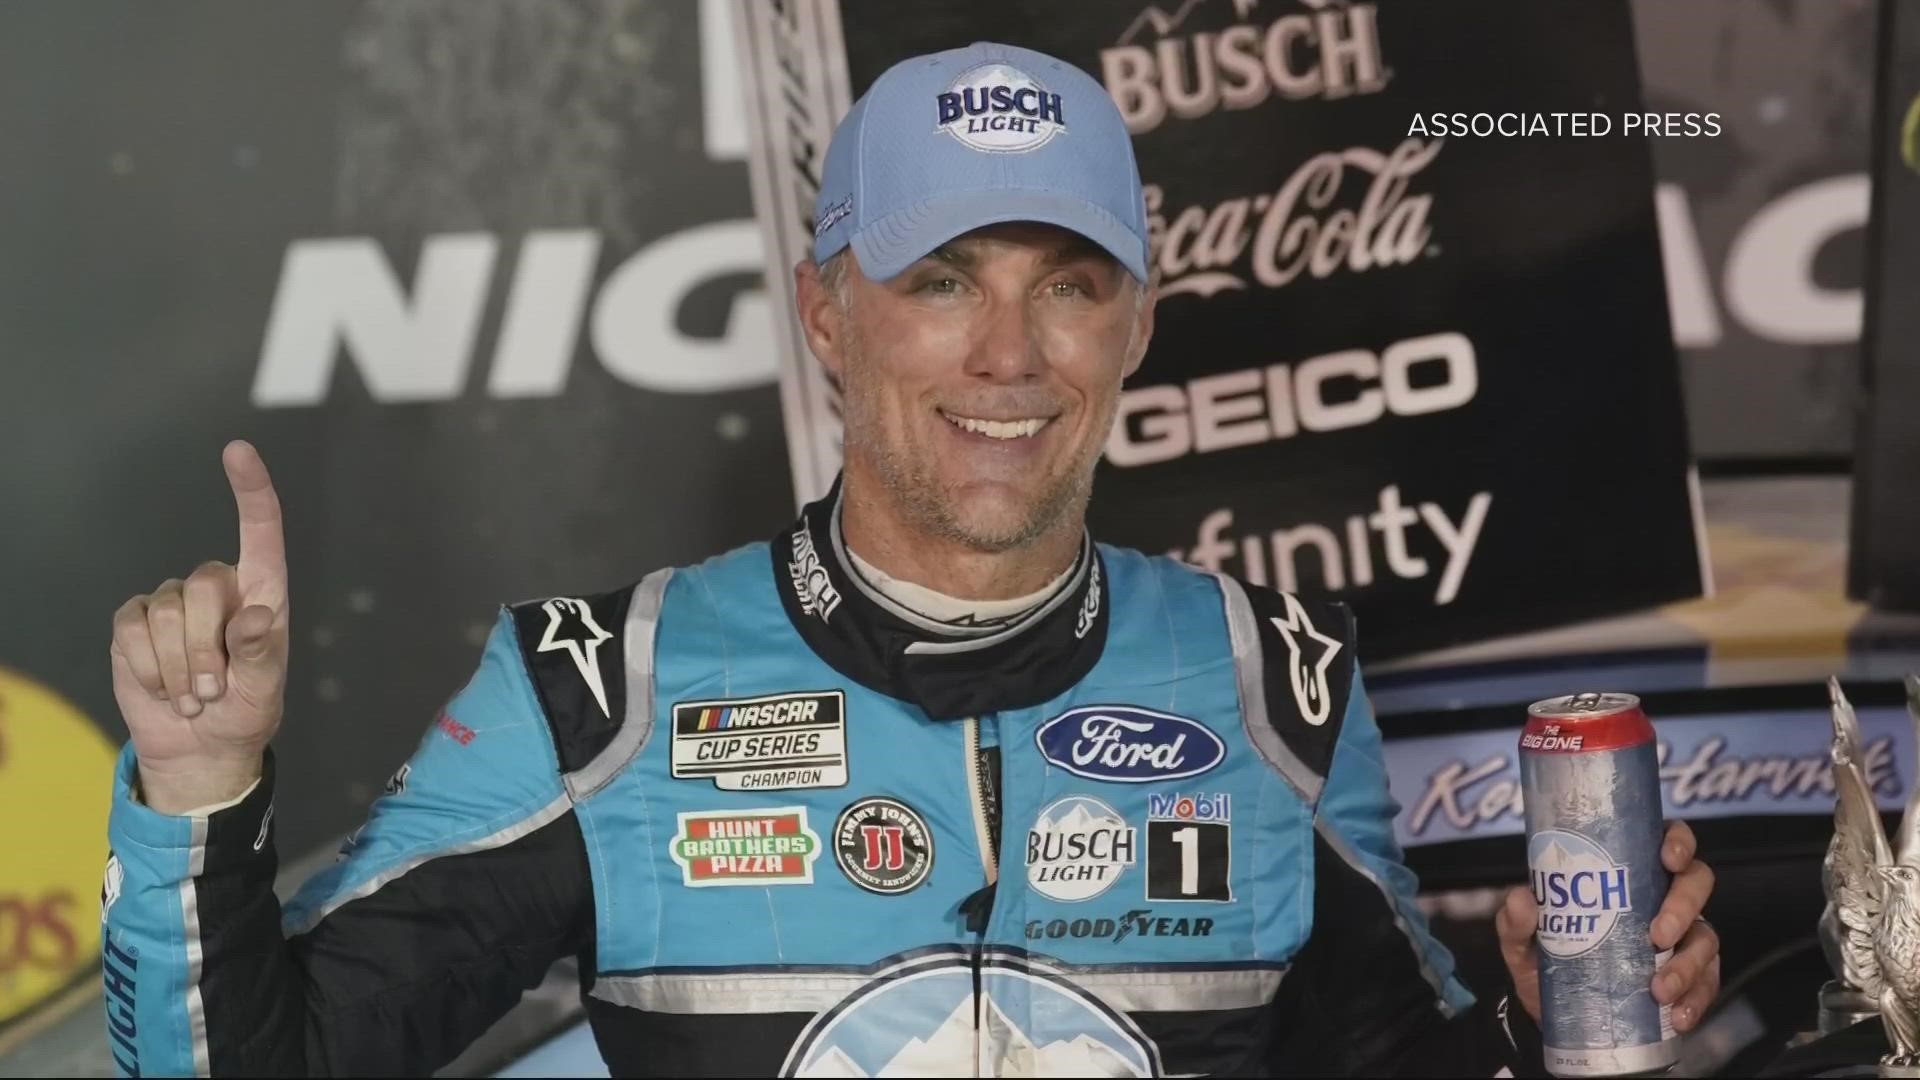 Kevin Harvick has won just about everything during his decorated NASCAR Cup Series career.